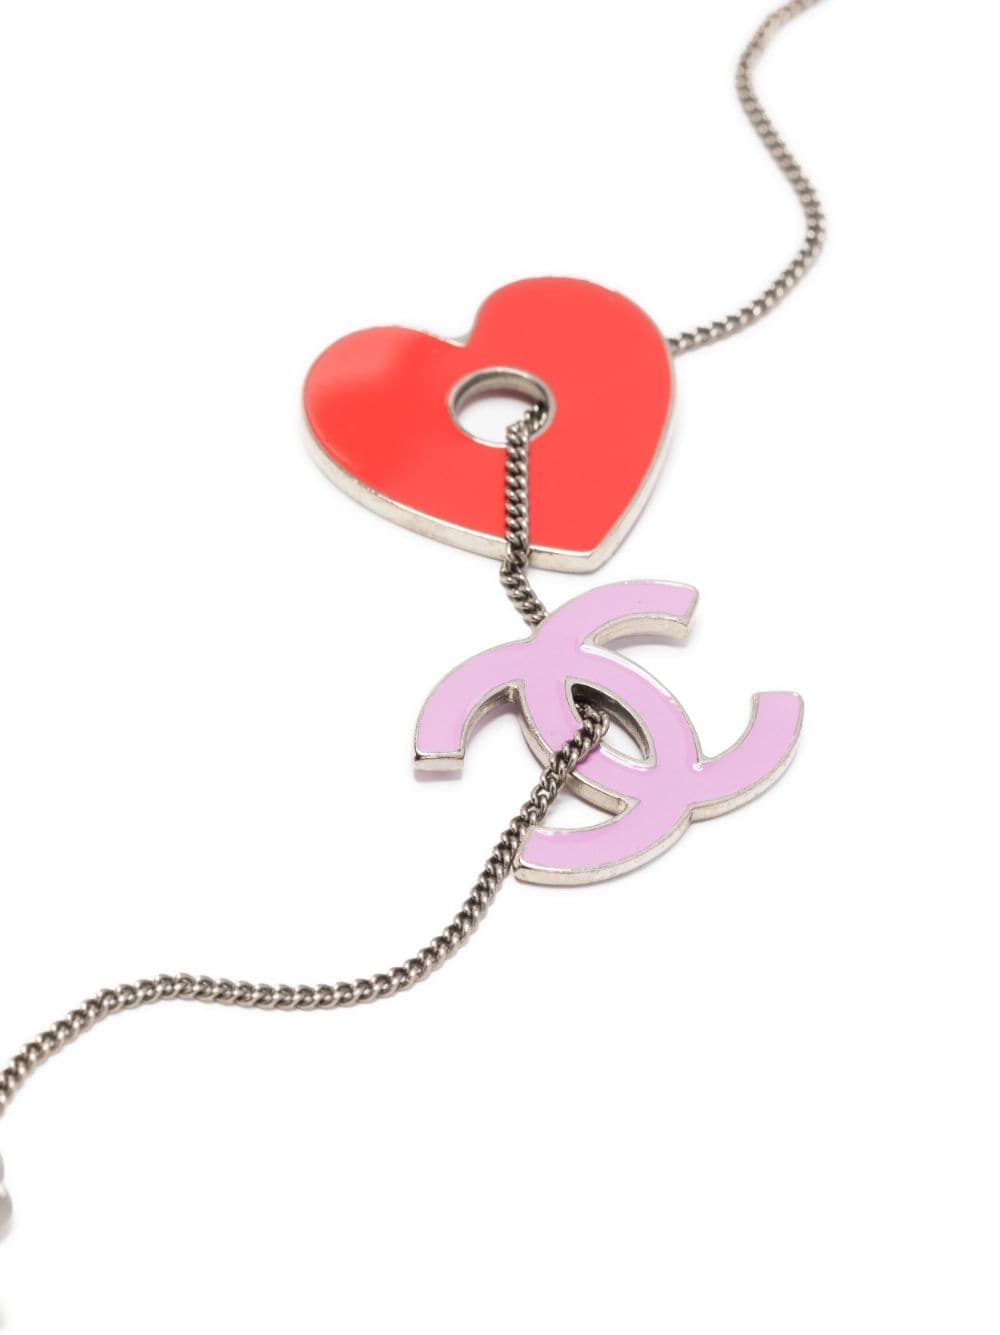 Chanel Limited Edition Valentines Rare Heart Charm Pink Classic Flap